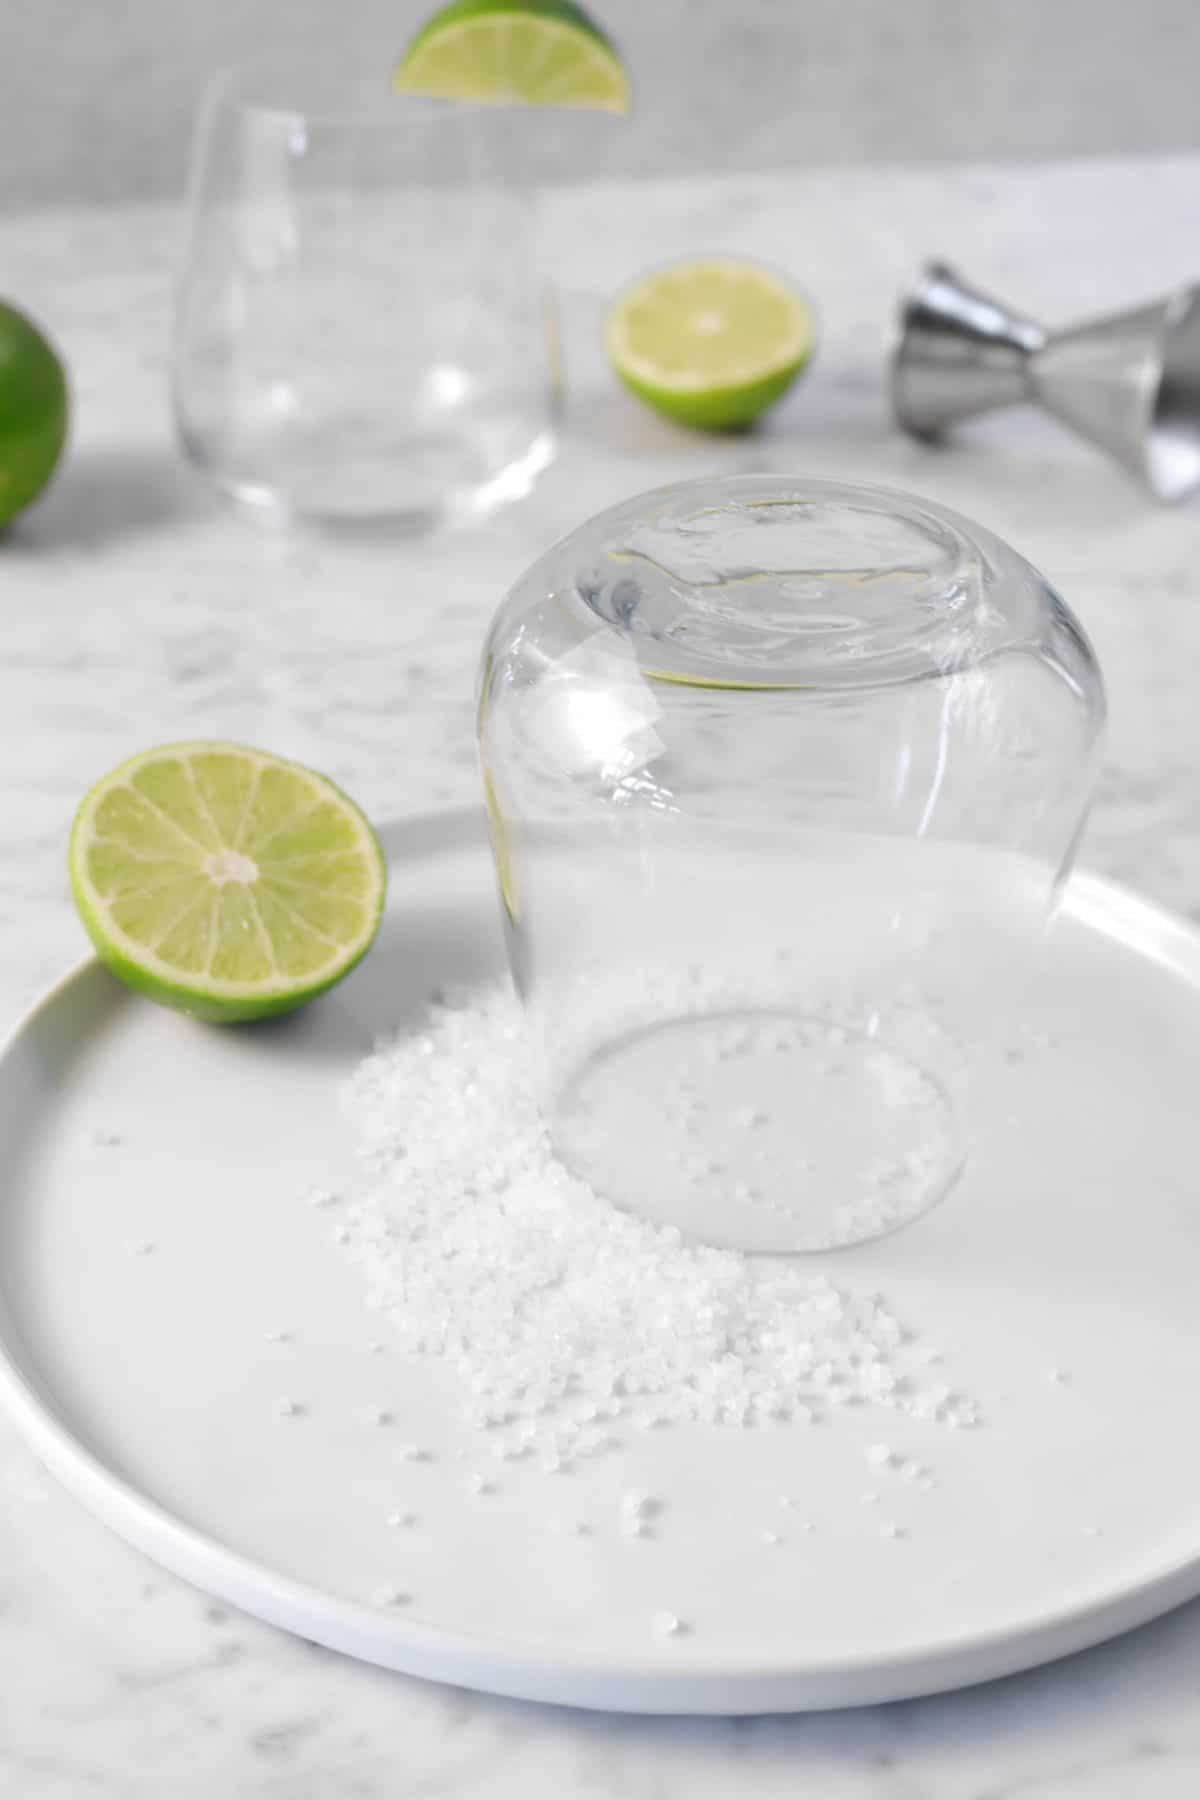 a glass turned upside down pressed against salt with lime slices on a marble board